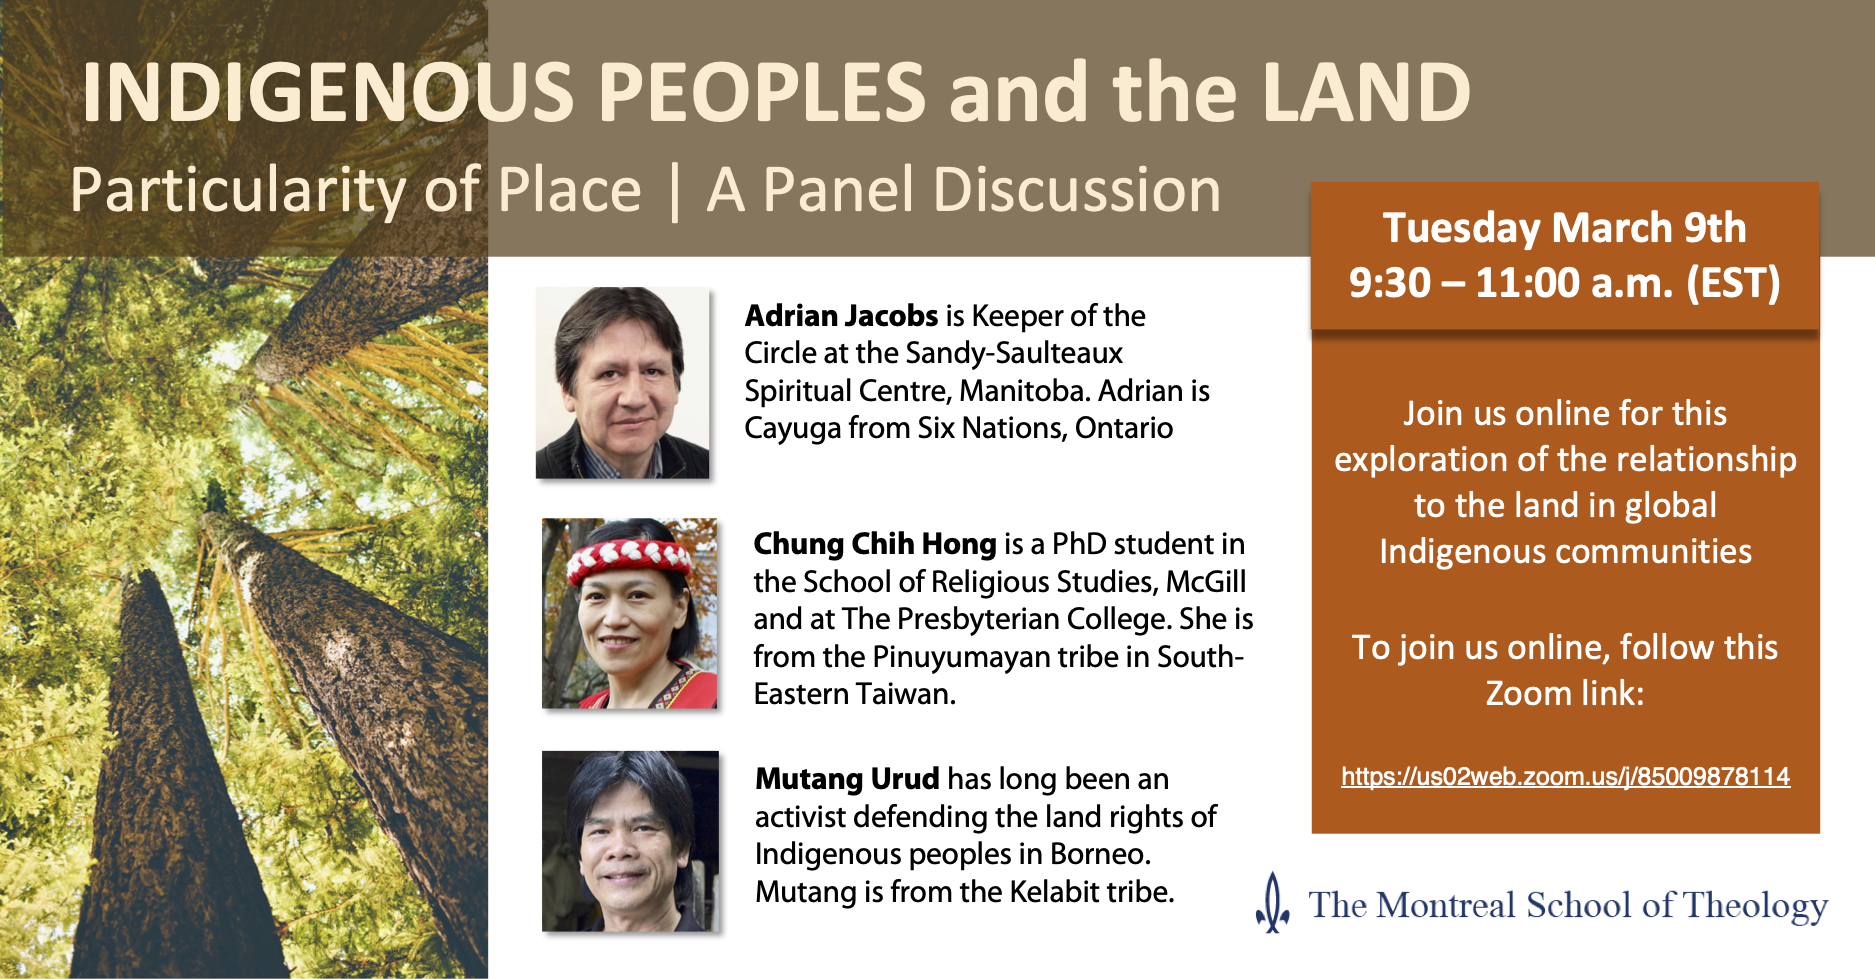 Panel Discussion: Indigenous Peoples and the Land